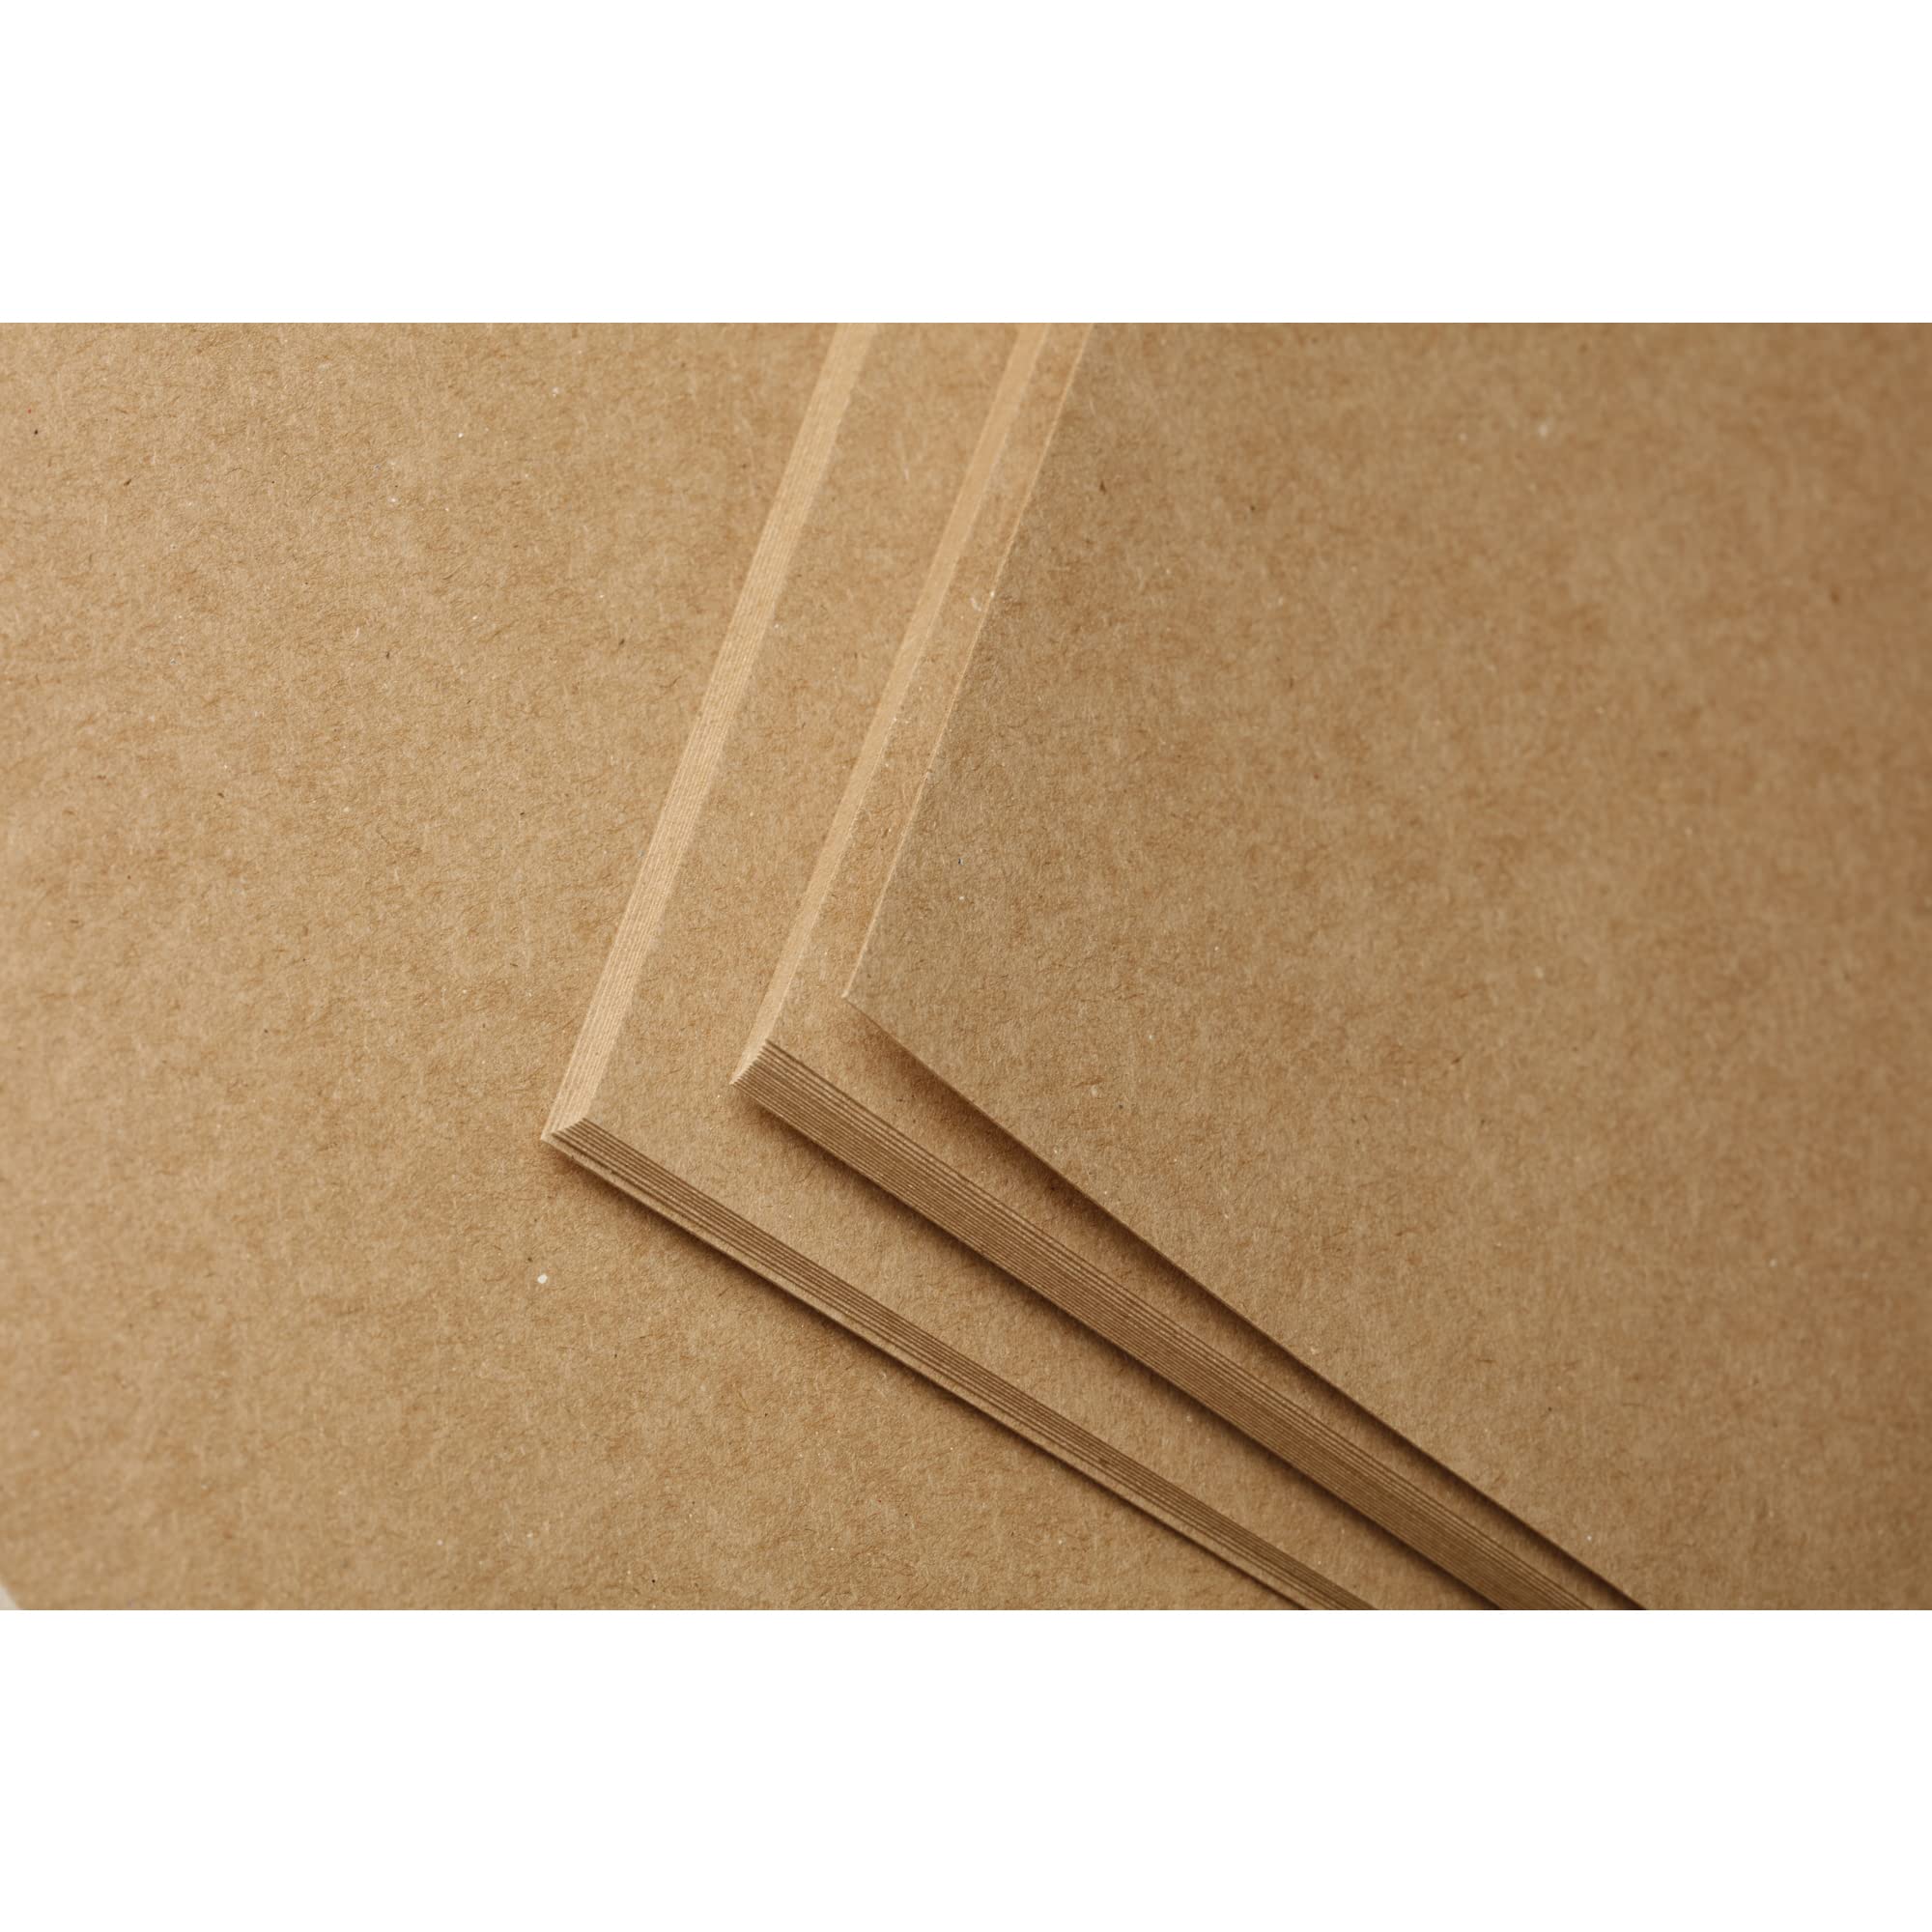 CLAIREFONTAINE Ribbed Kraft Sheets 275g A4 1s